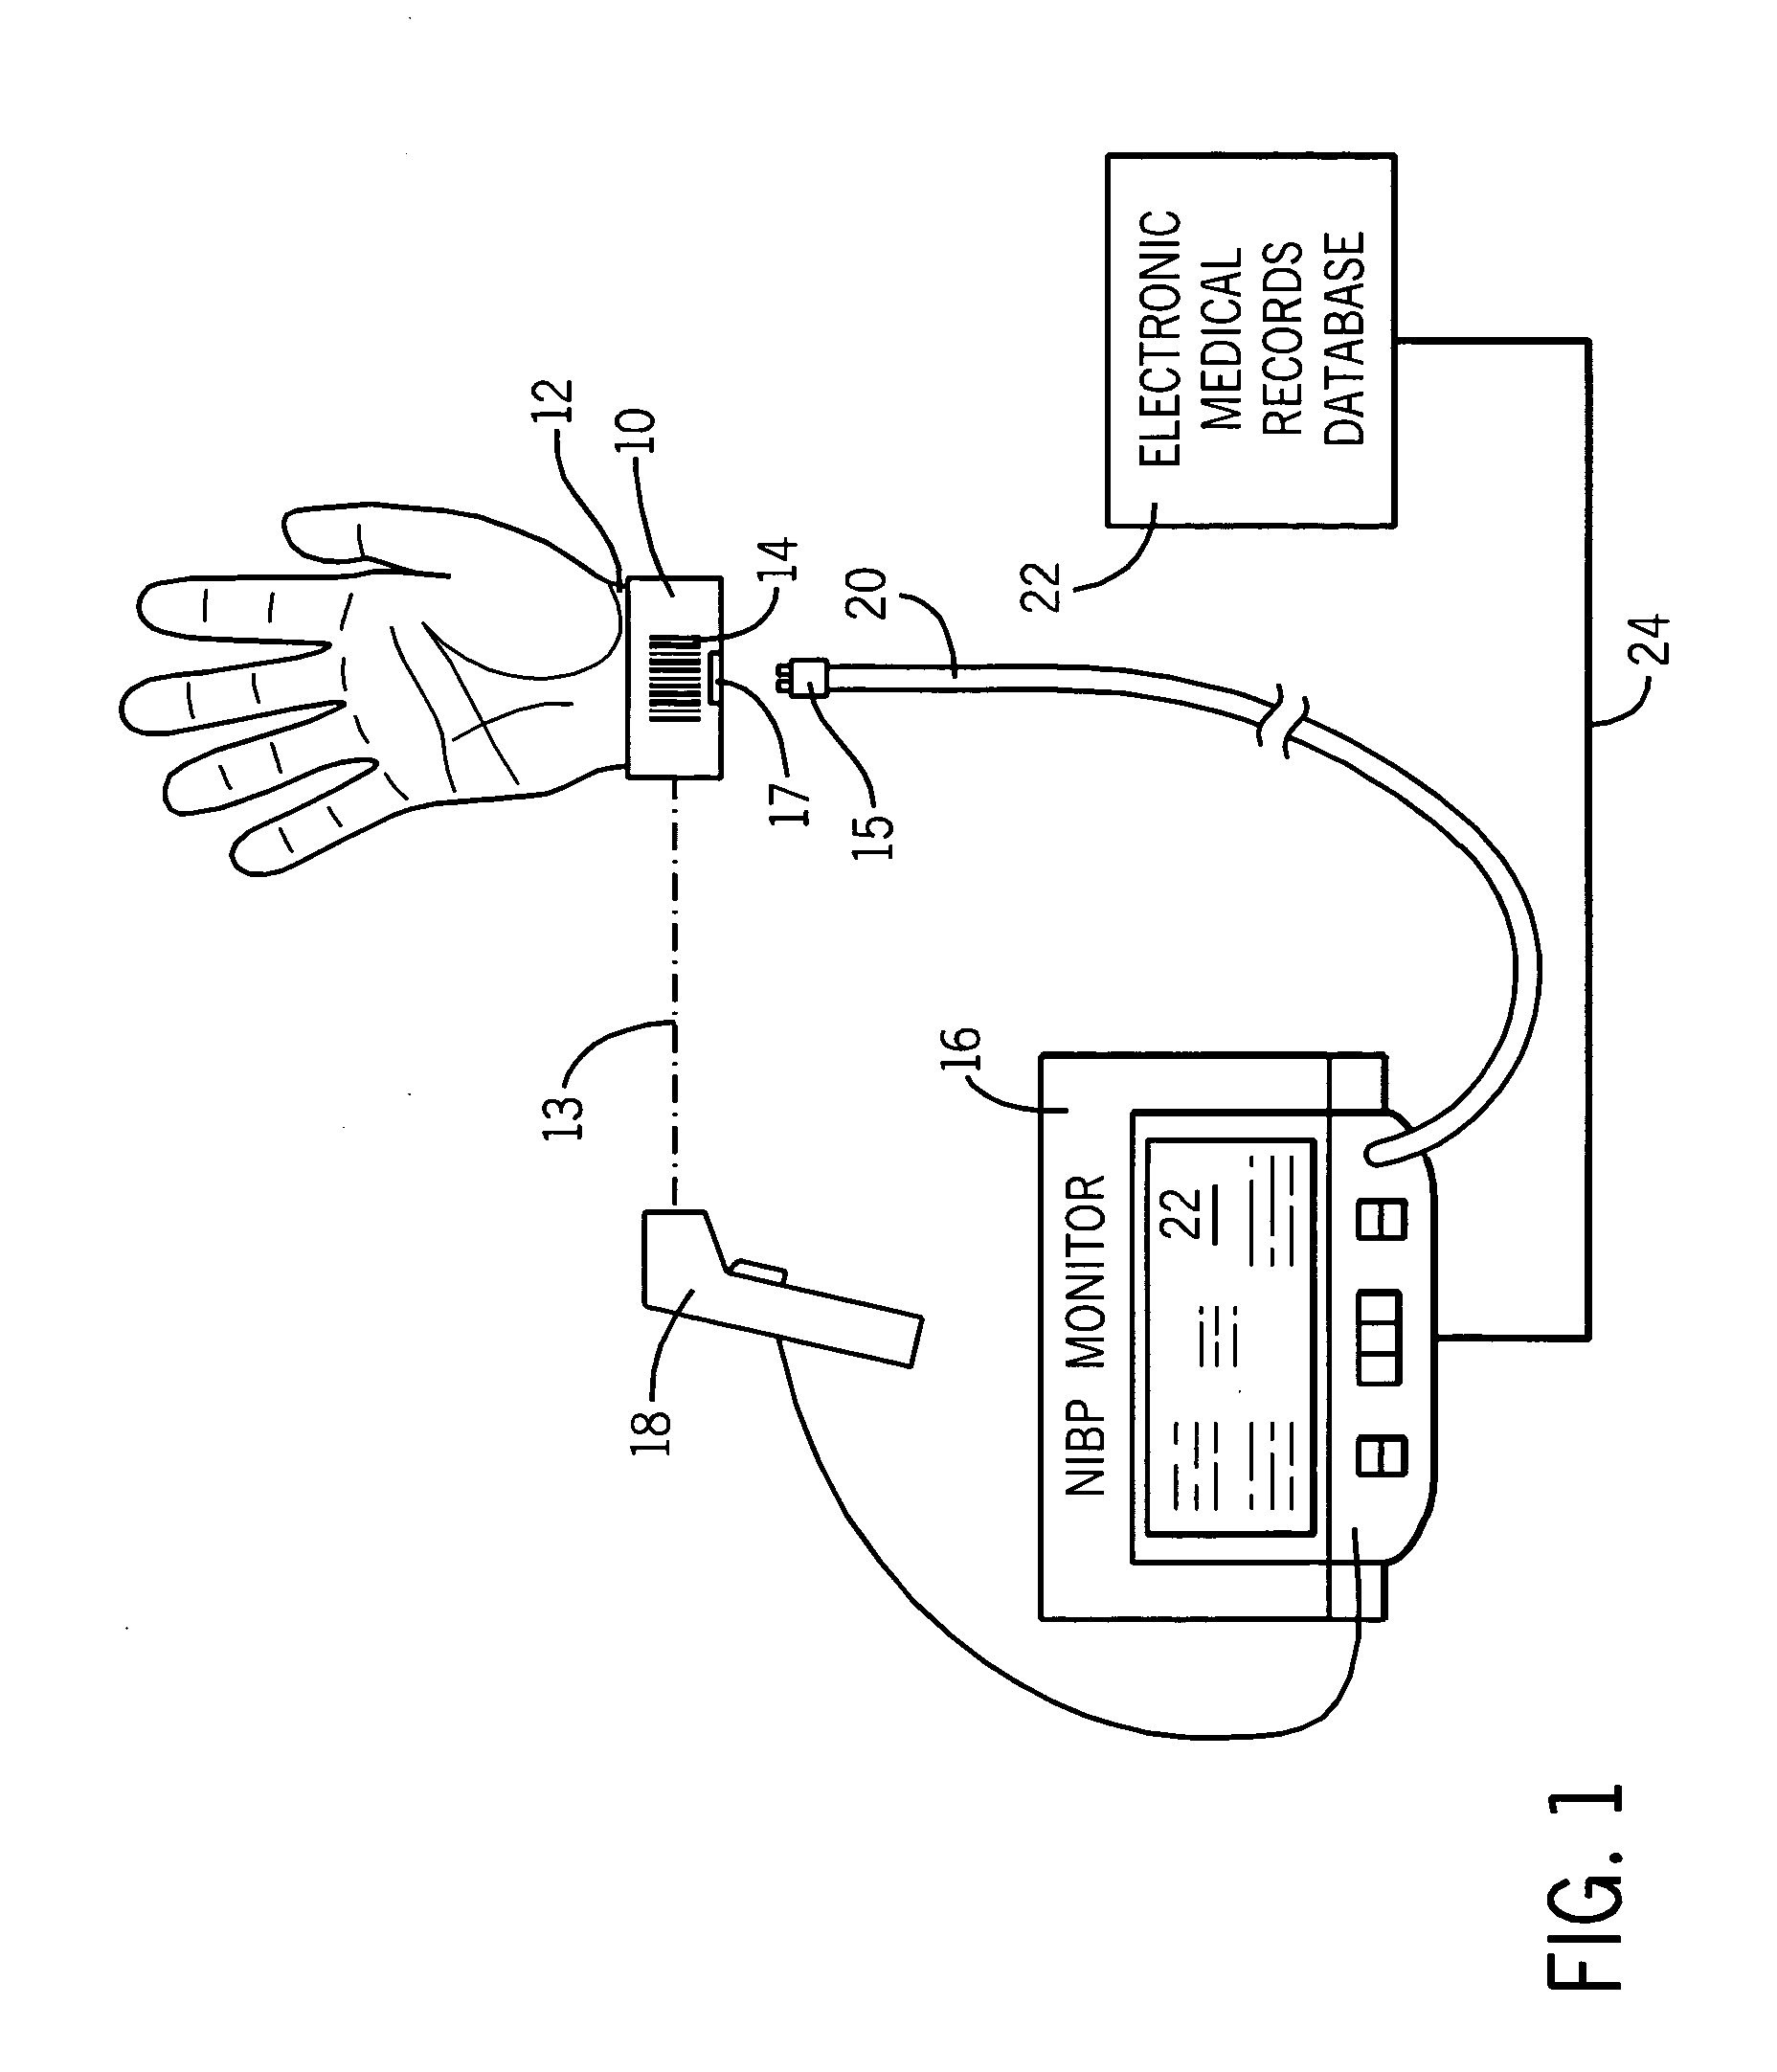 Apparatus, system and method for collecting non-invasive blood pressure readings